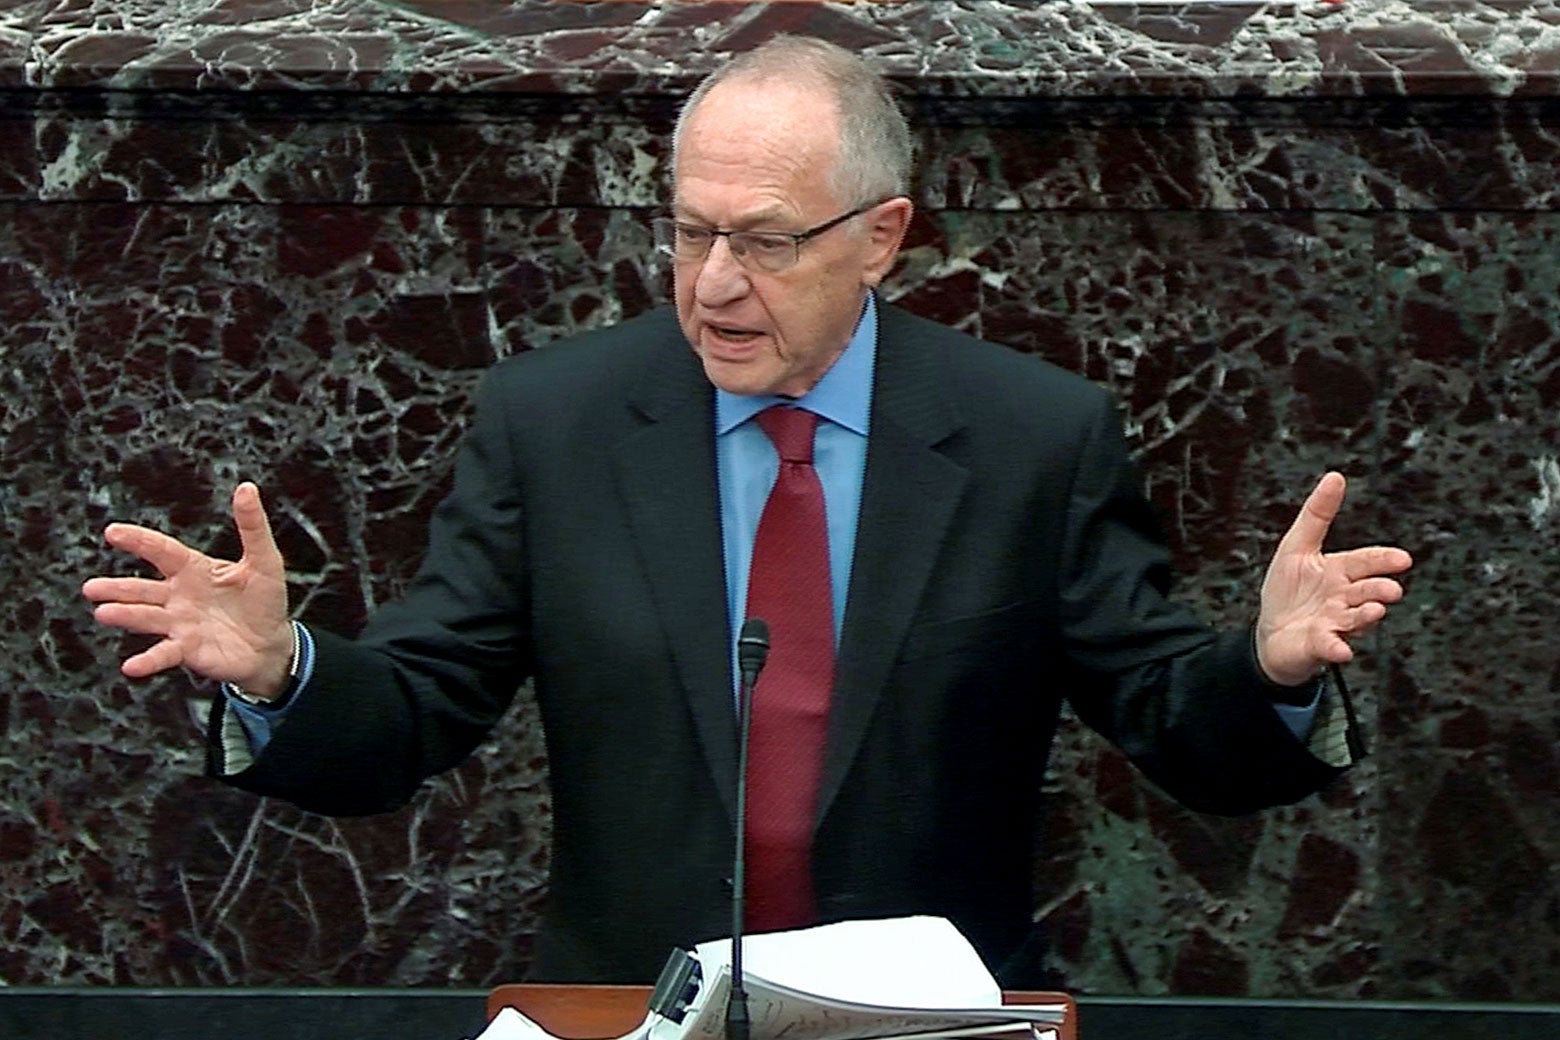 Dershowitz raises his arms while speaking at a mic before the Senate.